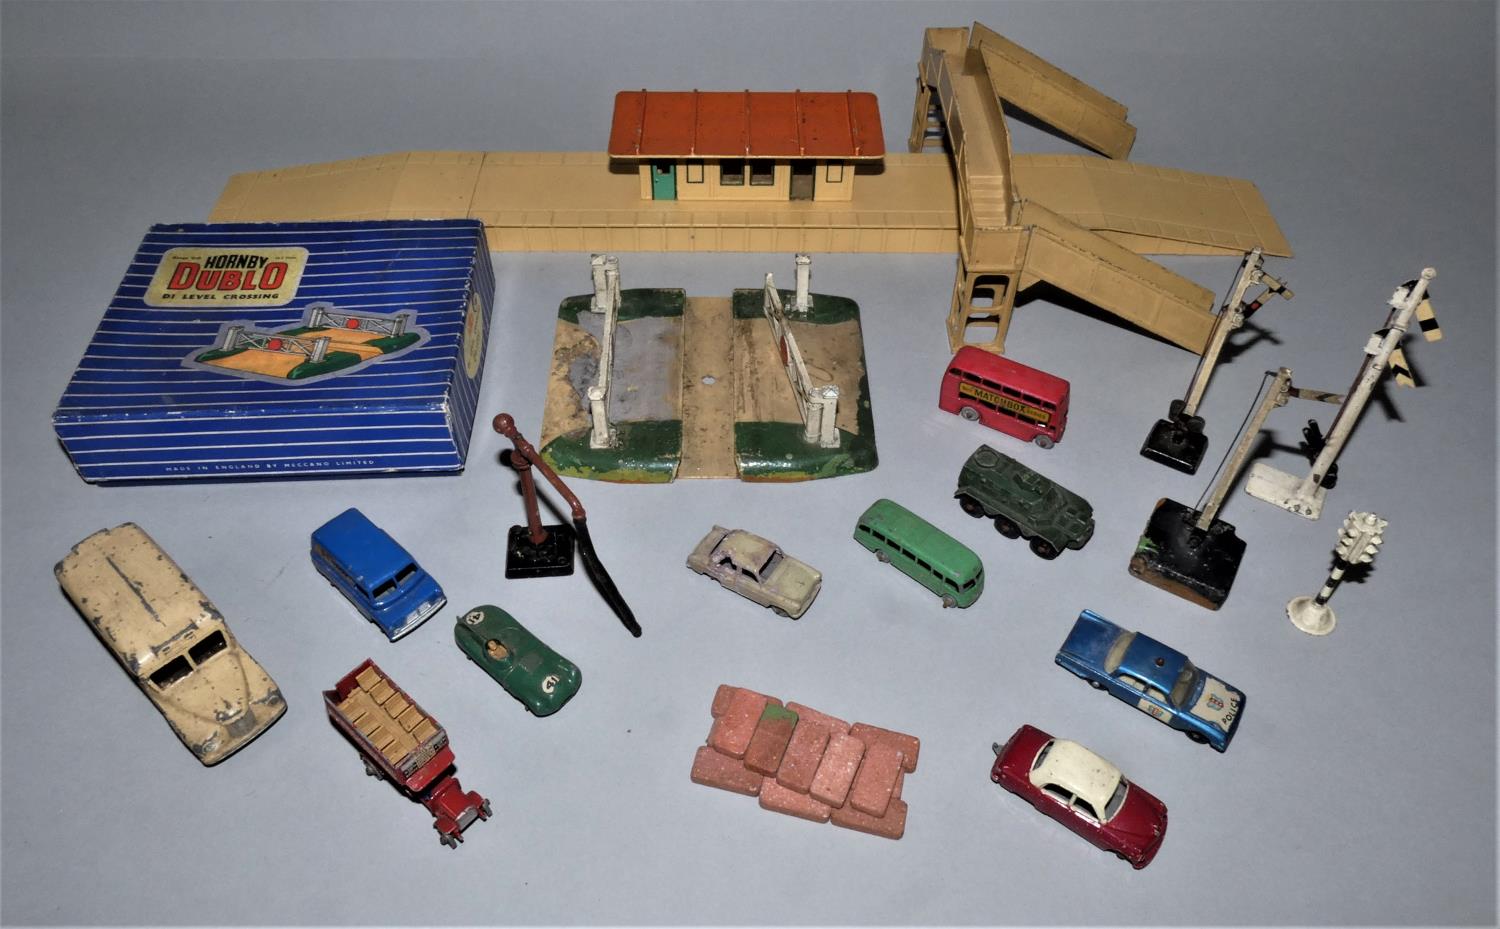 A collection of model railway power control units, untested and model railway station accessories (